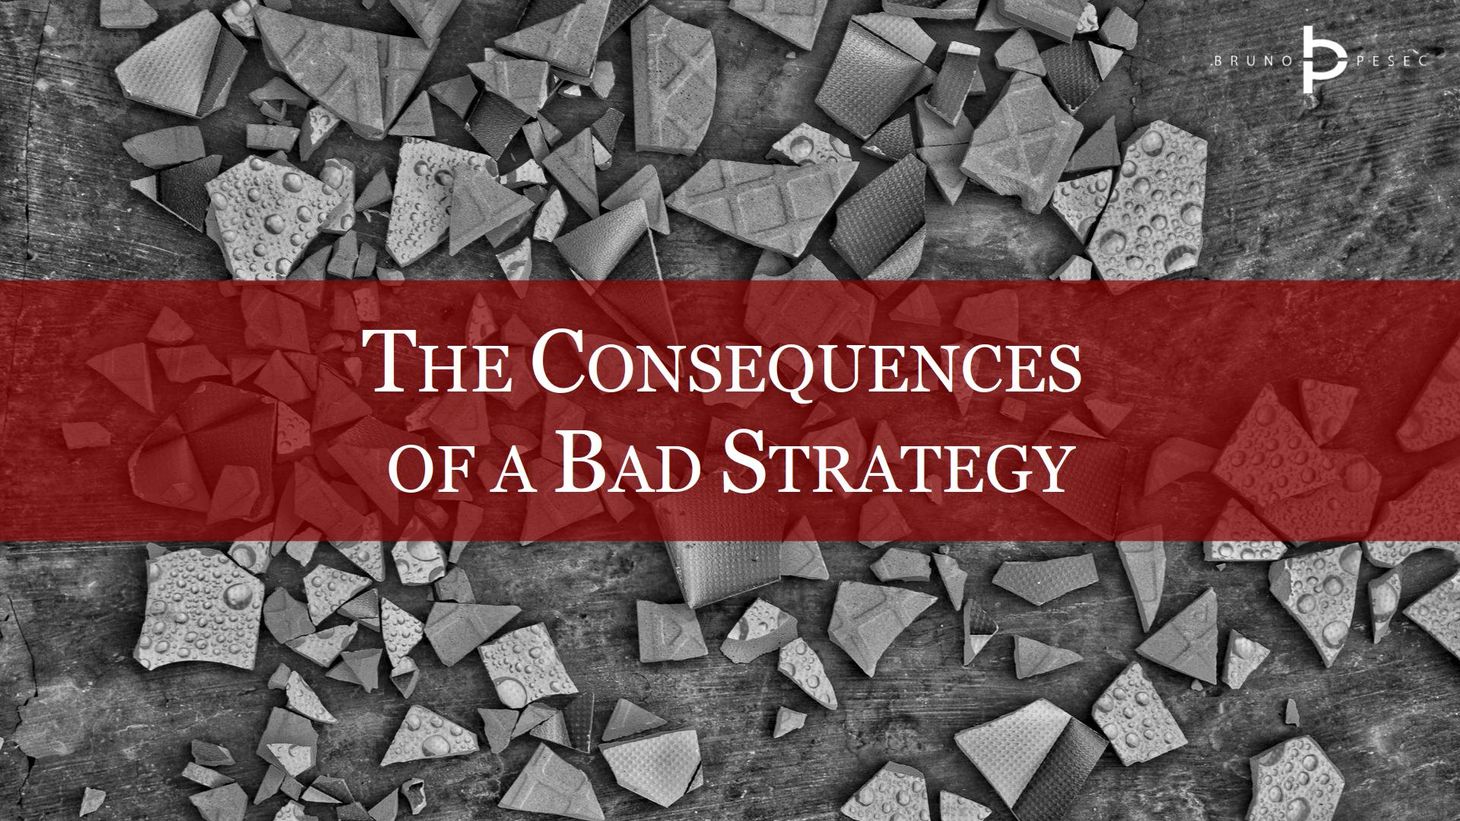 The consequences of a bad strategy